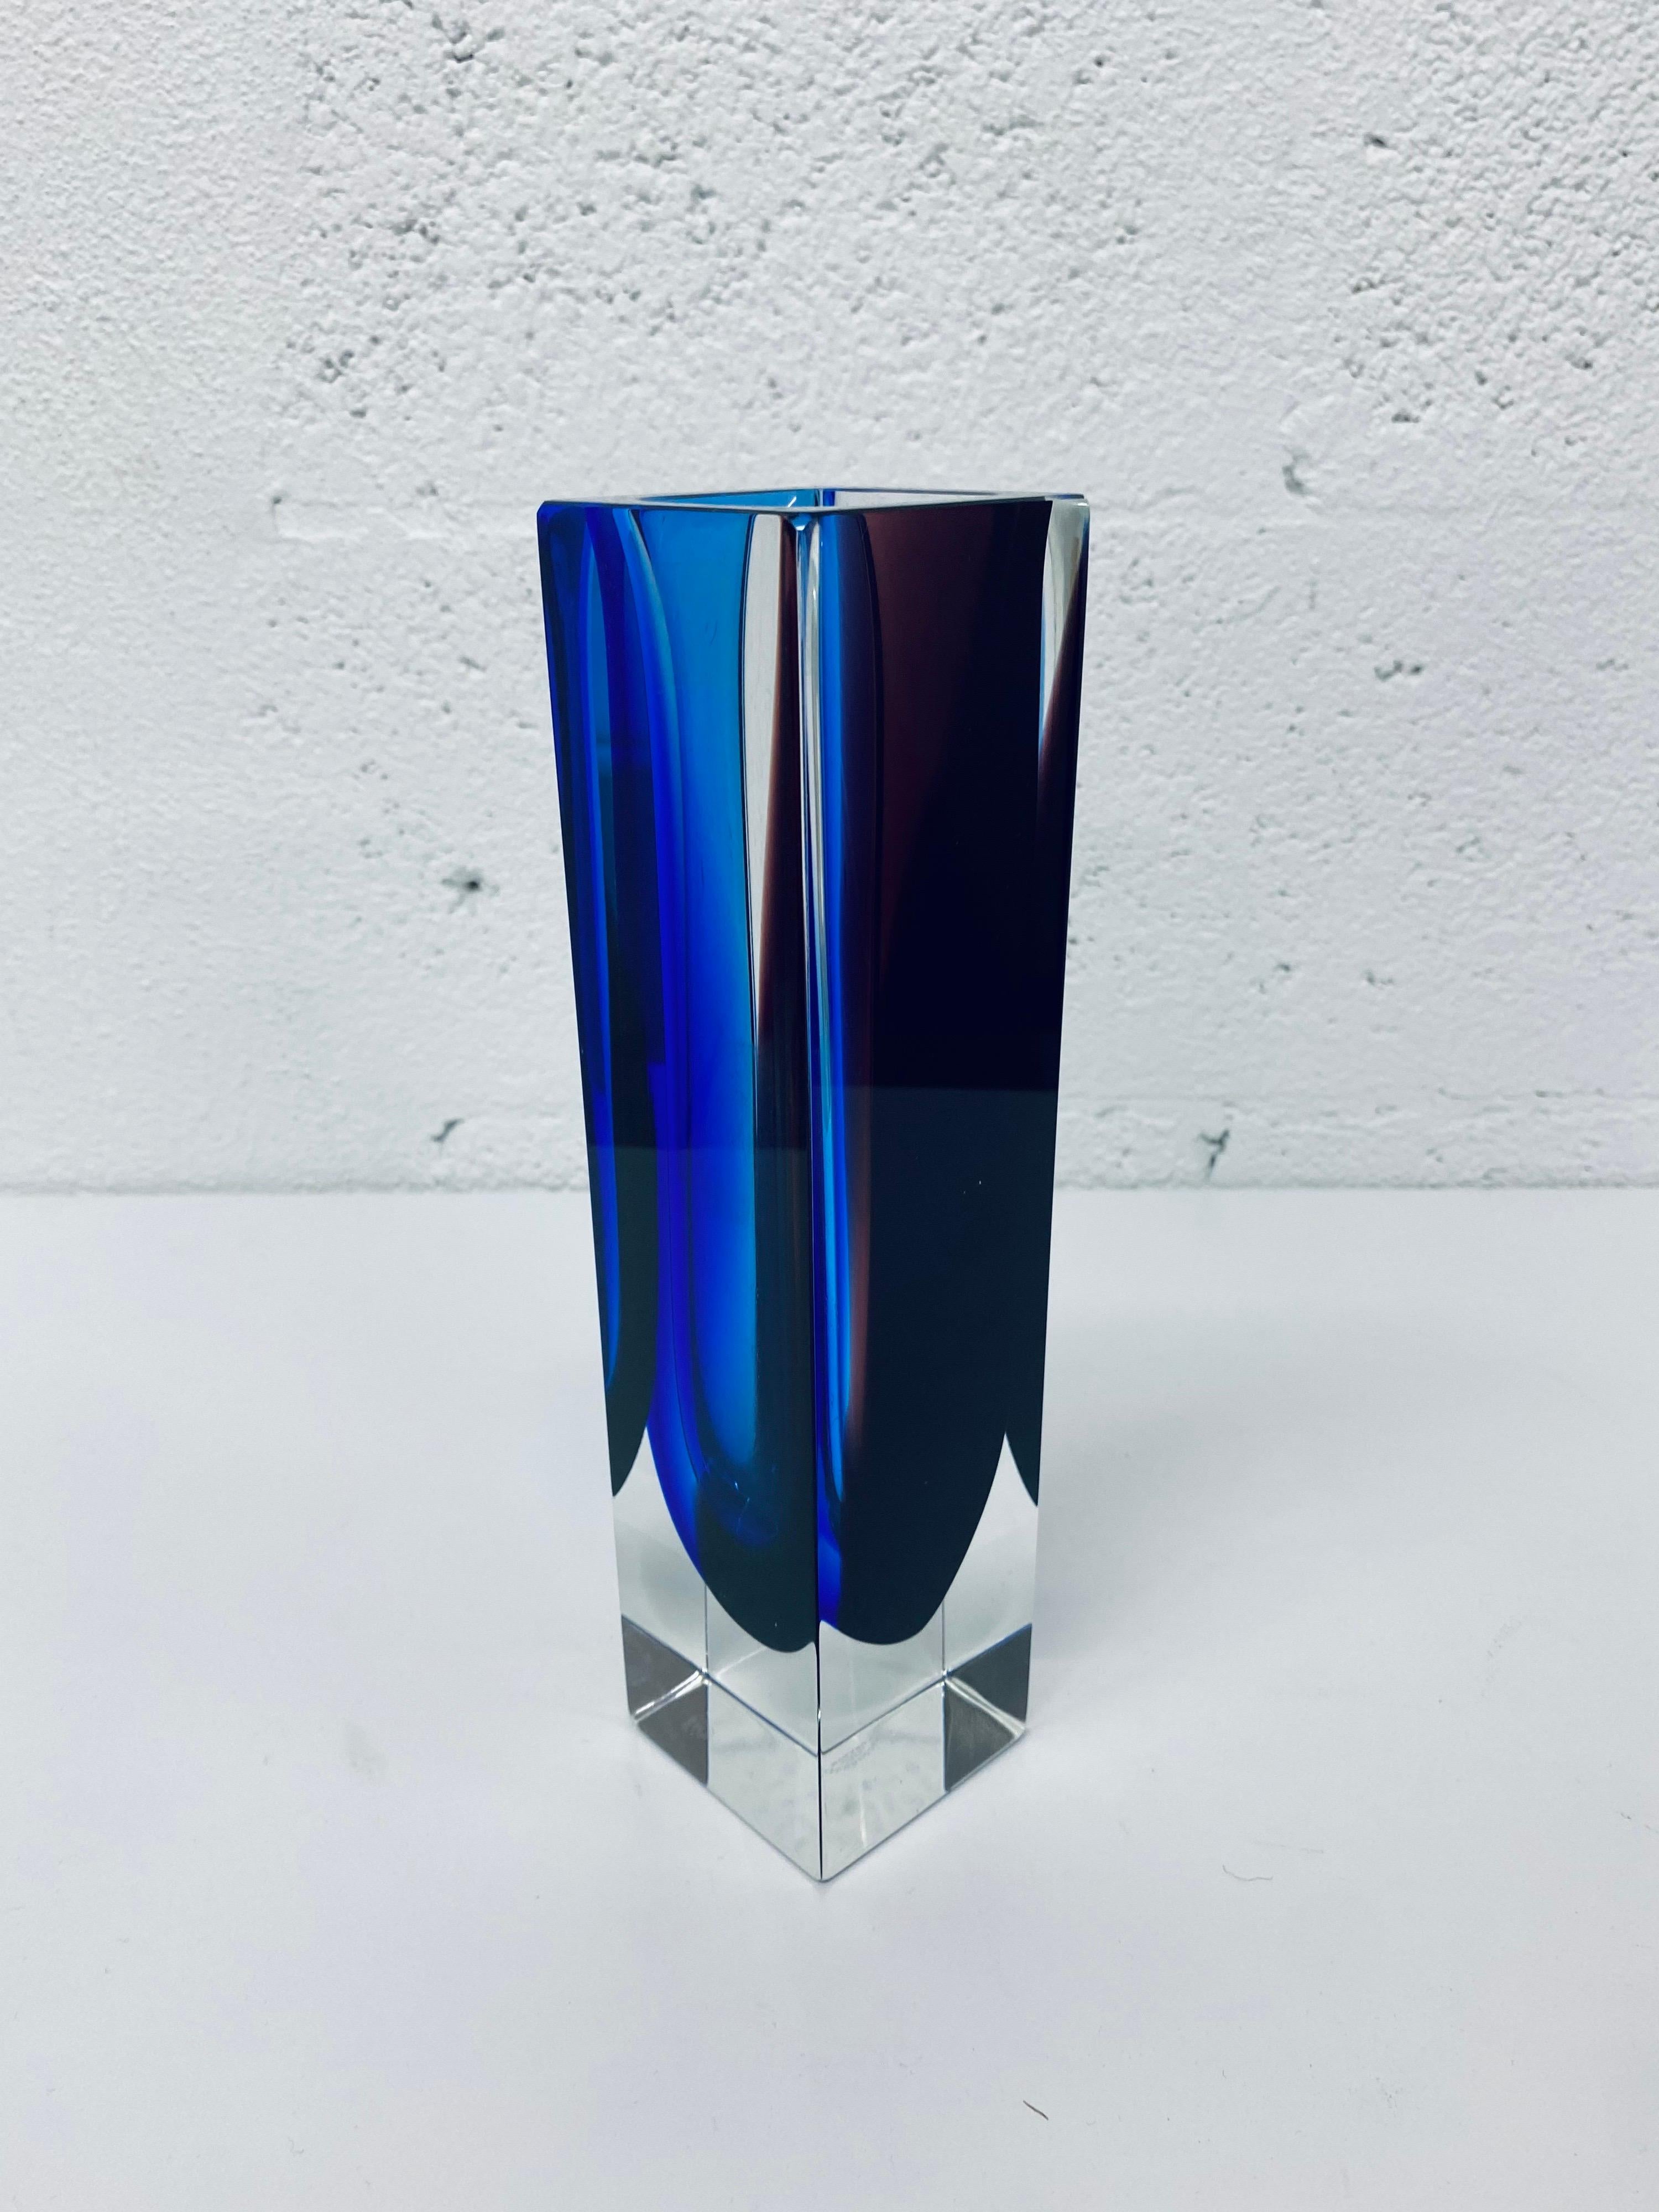 Alessandro Mandruzatto Hand Worked Blue and Purple Sommerso Block Vase 5